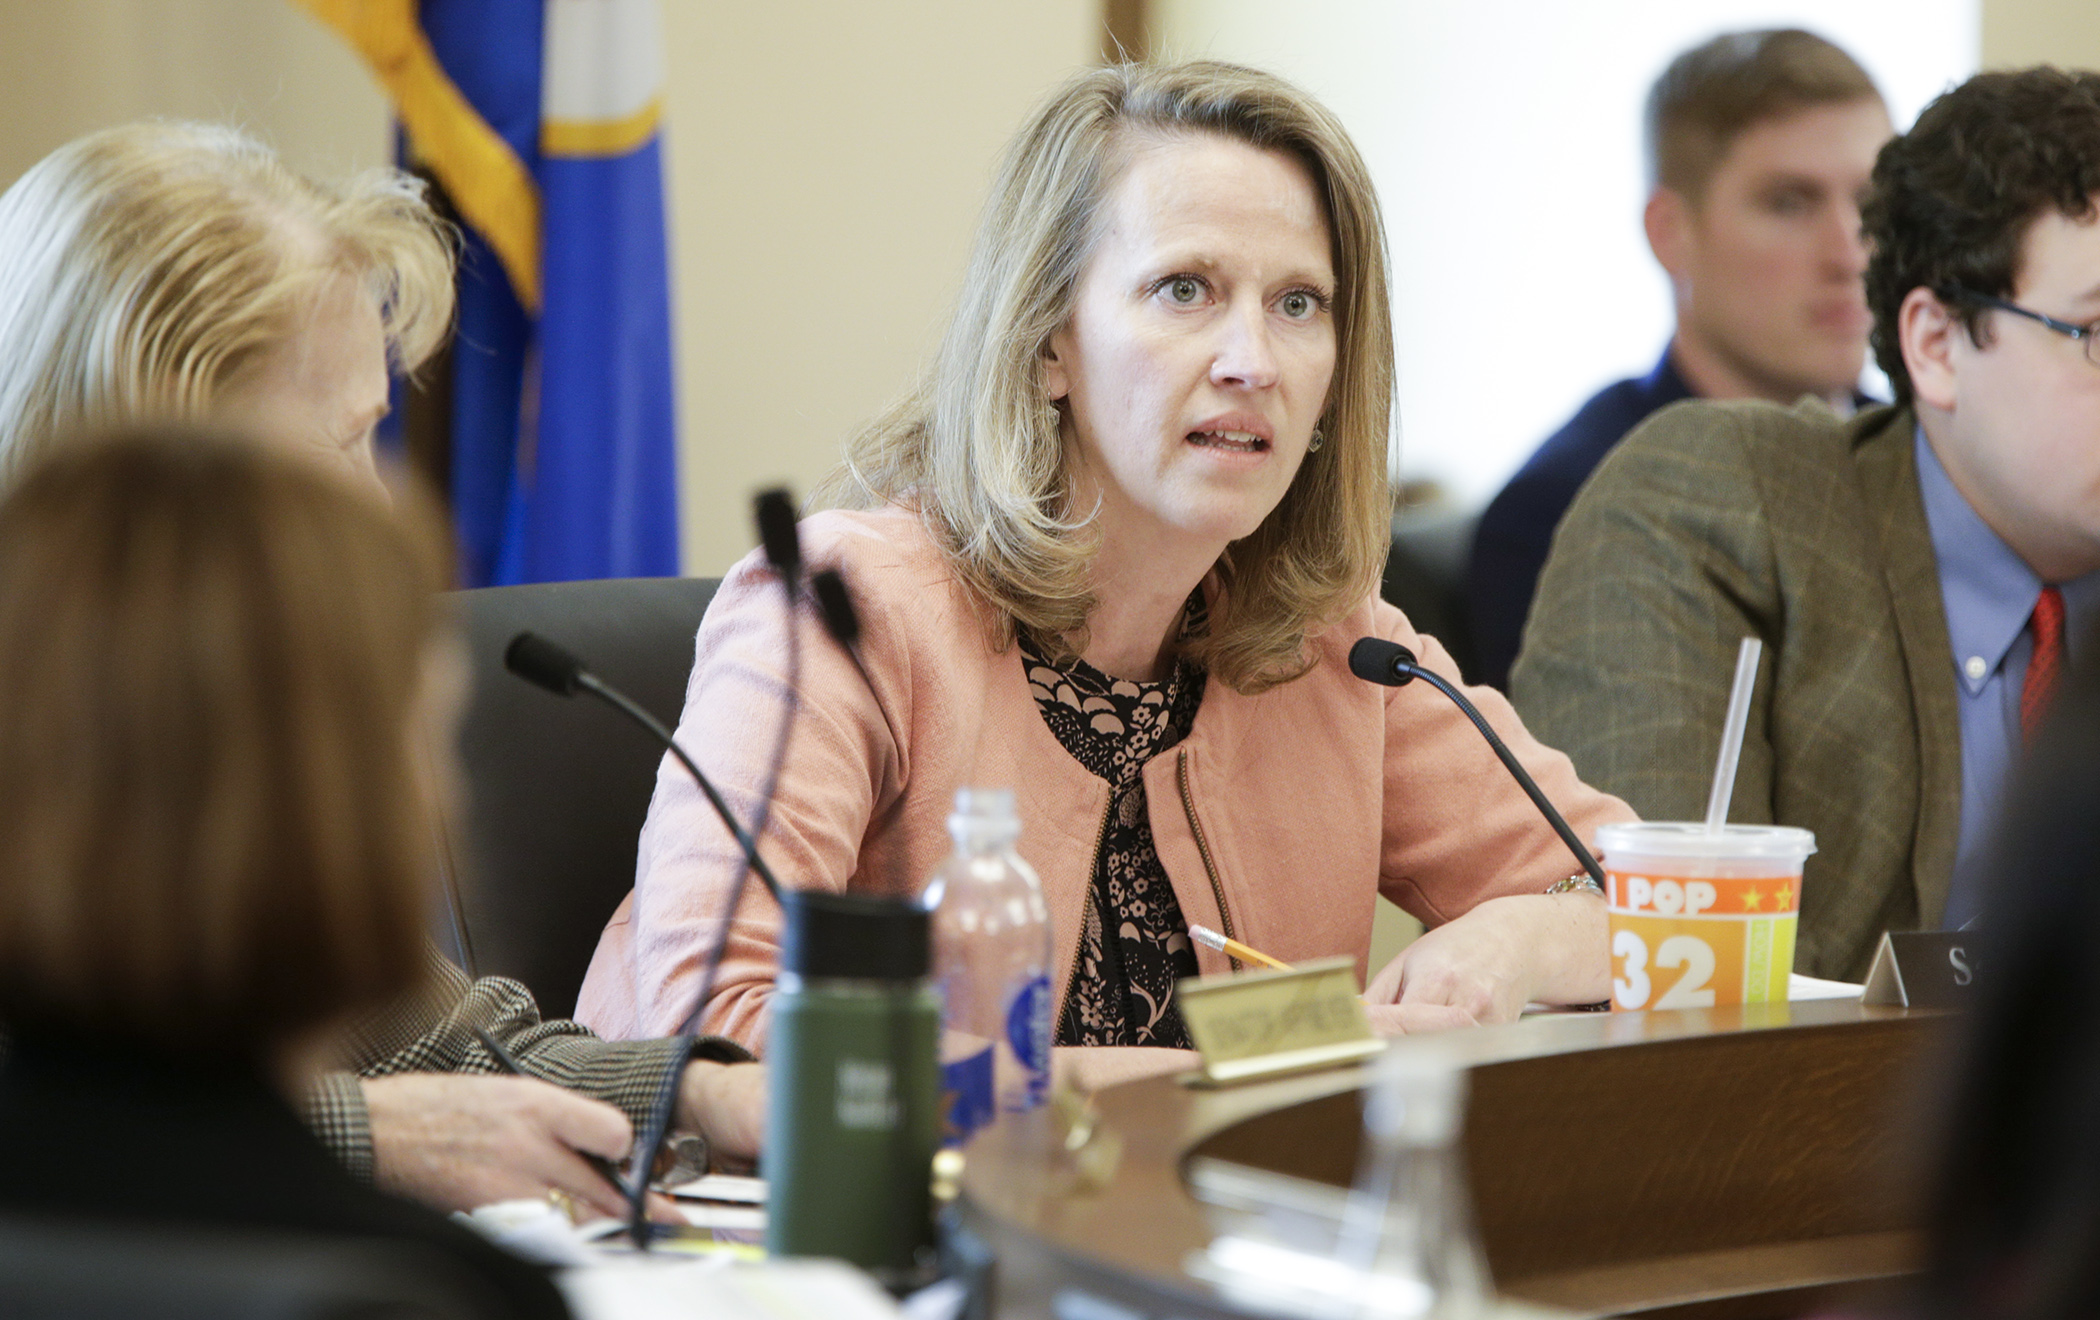 Rep. Sarah Anderson, co-chair of the omnibus state government finance conference committee, asks a question during the May 2 meeting. Photo by Paul Battaglia